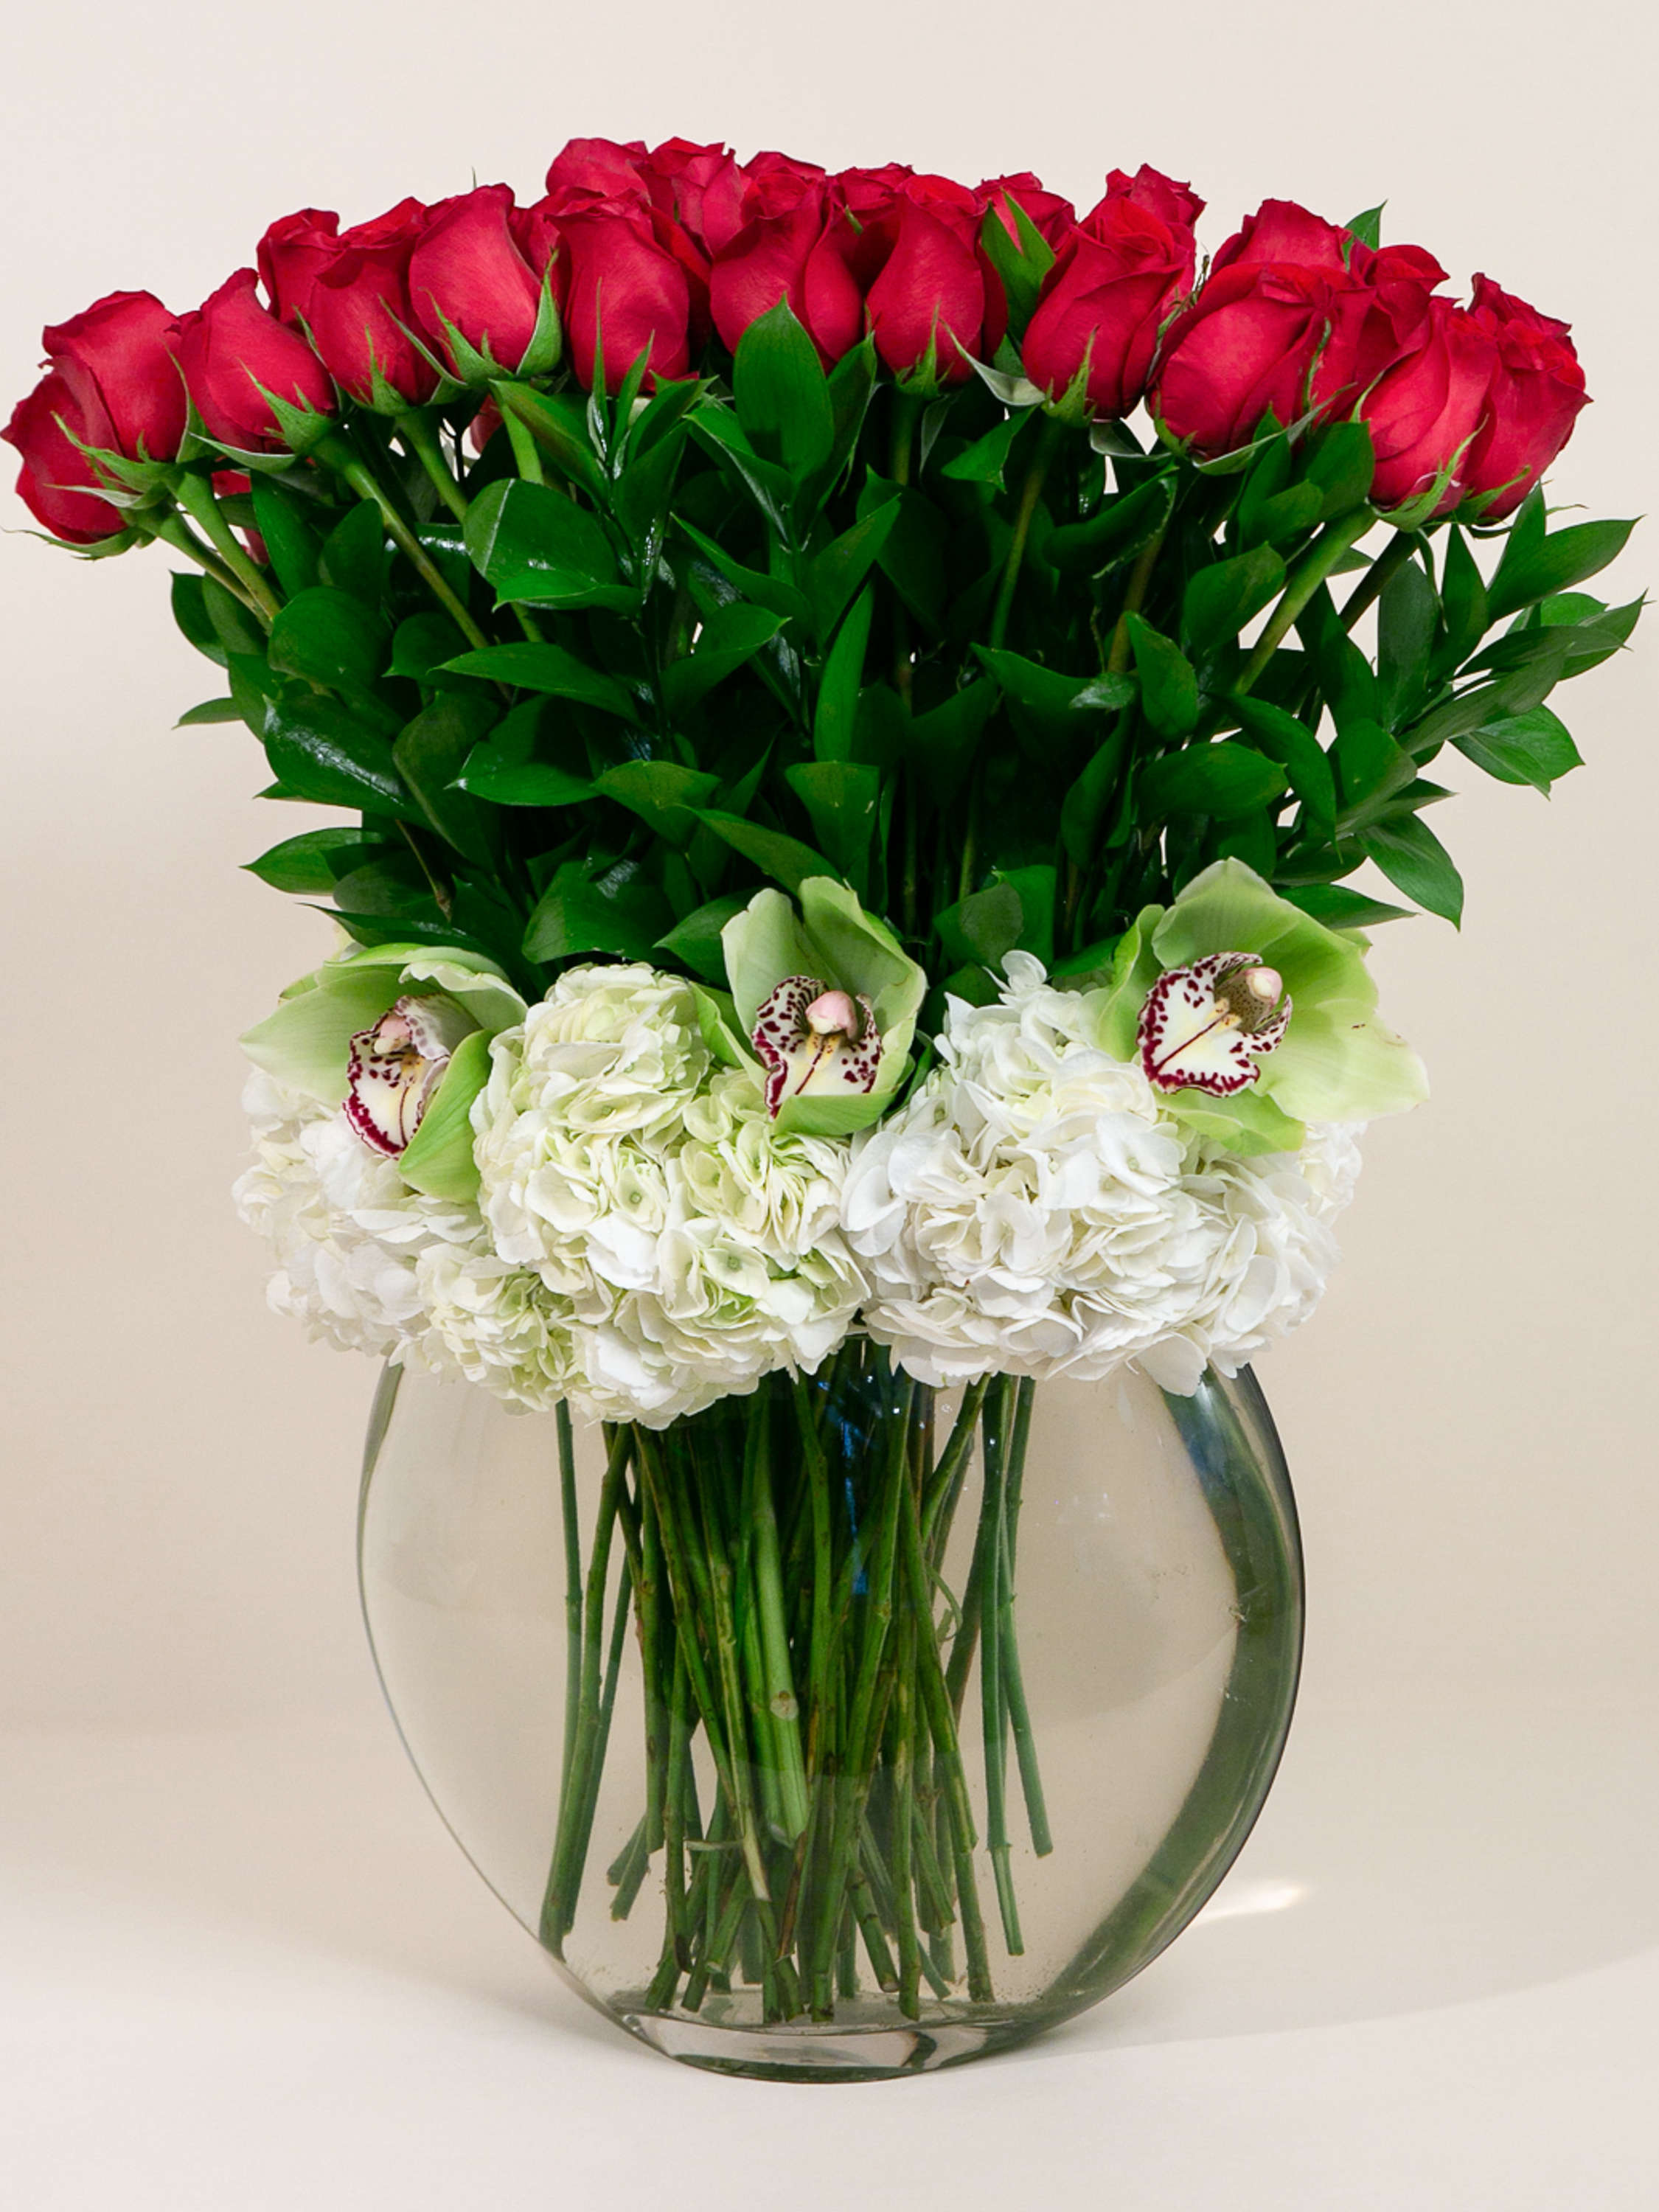 Silver Bells & Roses at From You Flowers